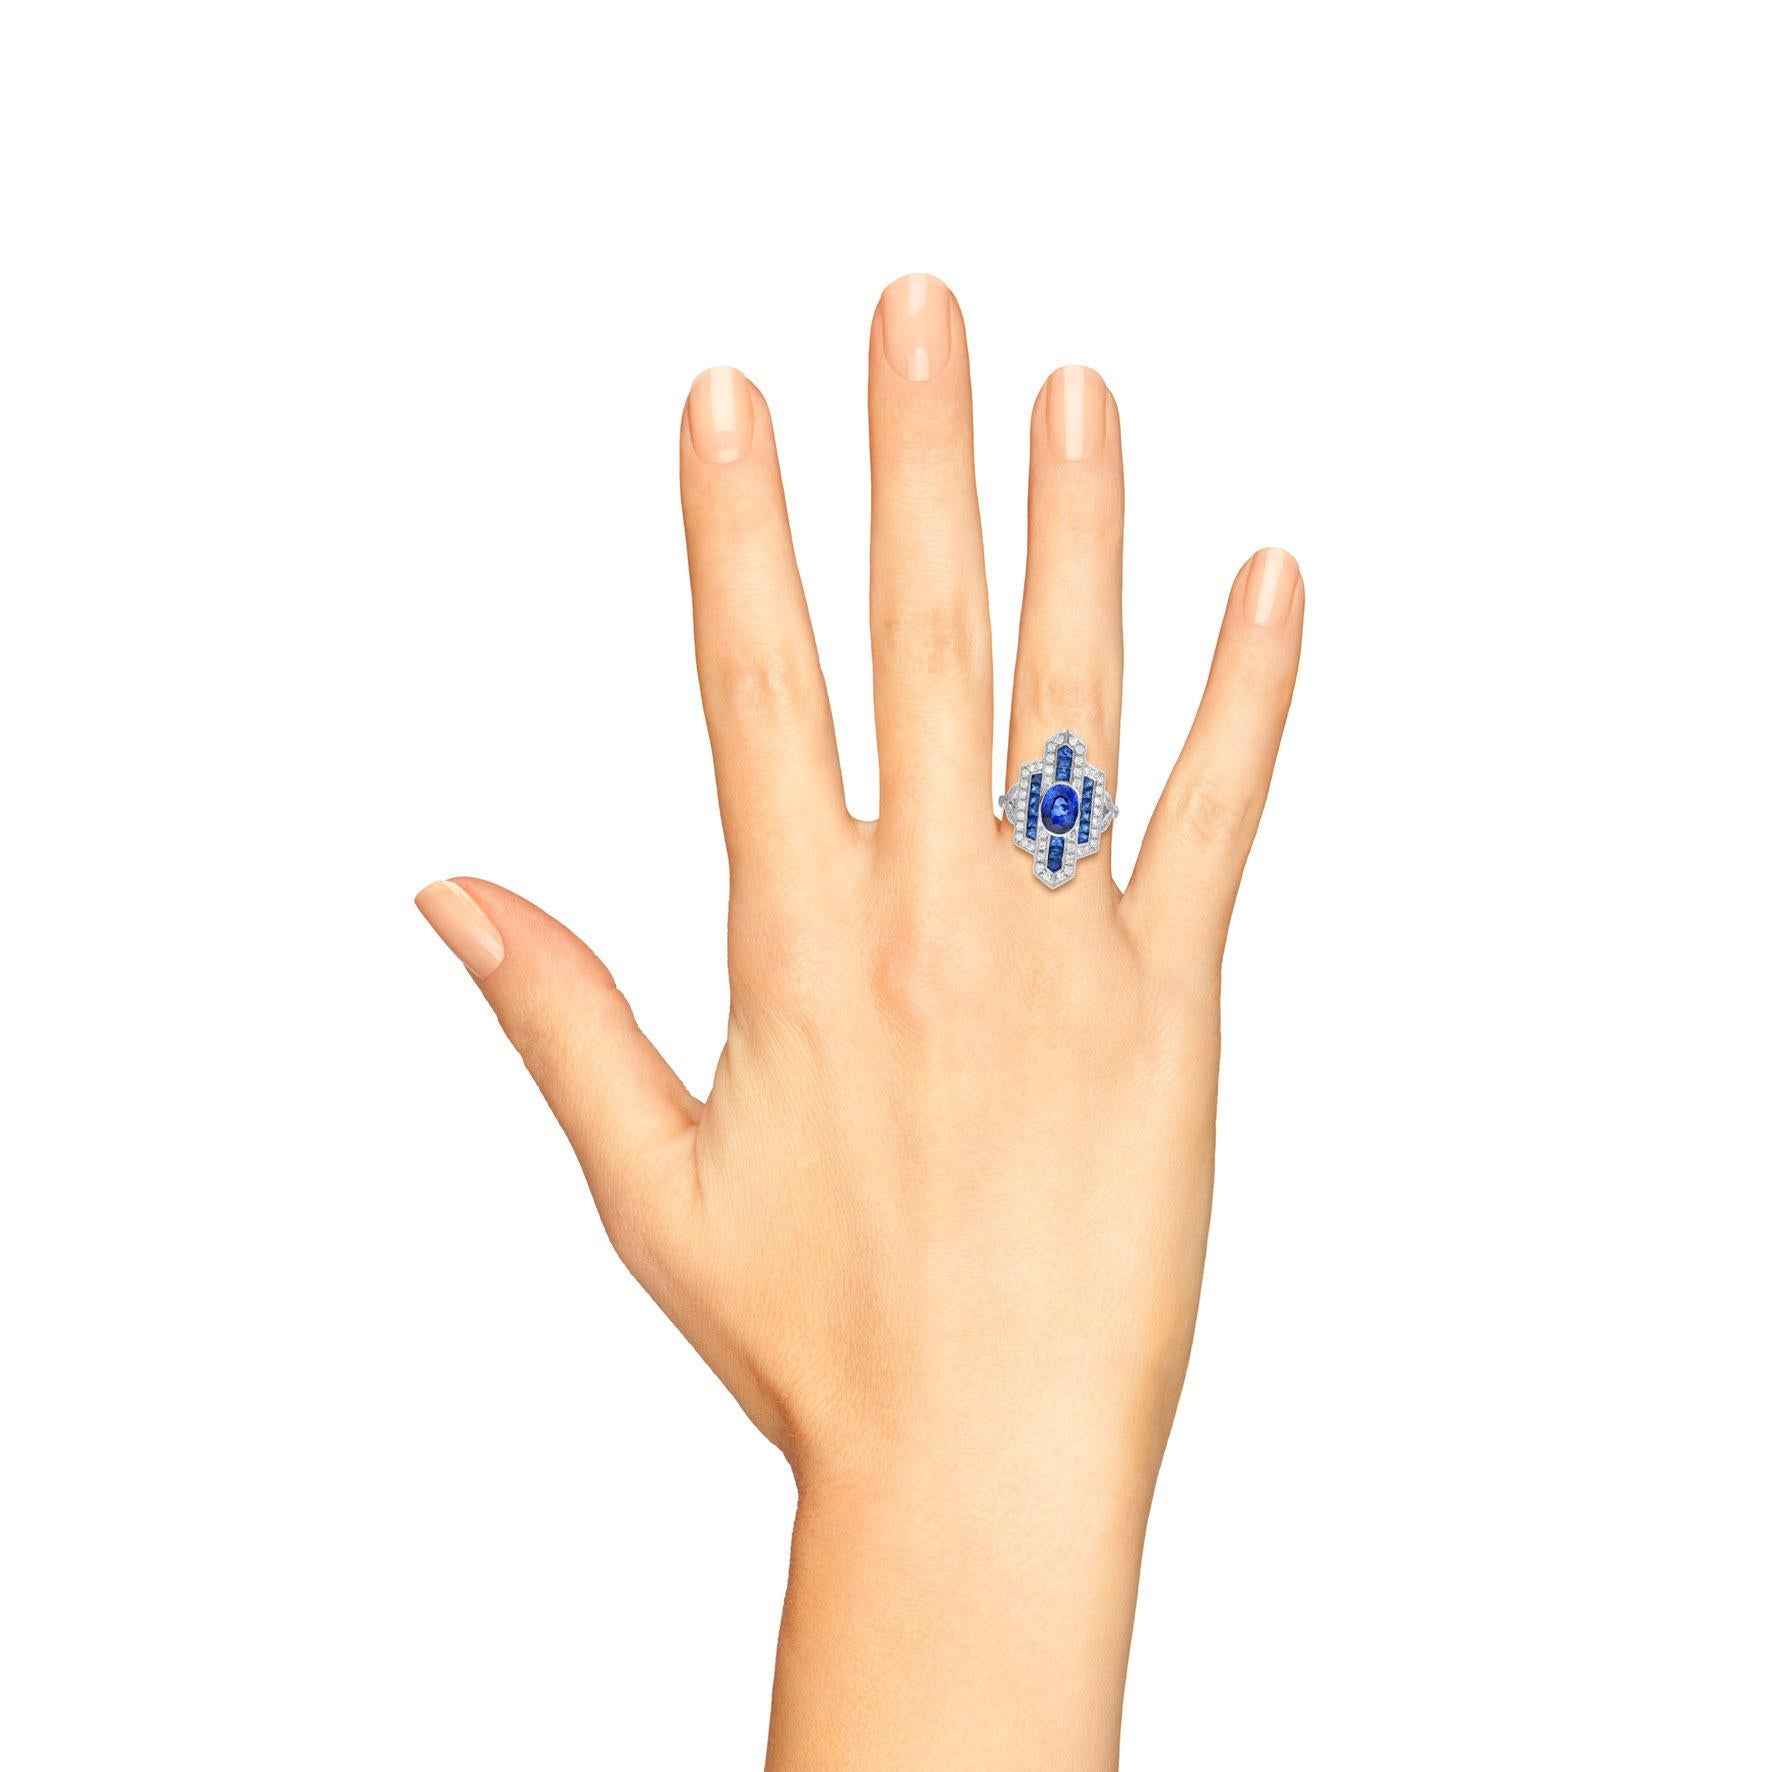 This gorgeous vintage inspired sapphire and diamond cocktail ring truly capture the iconic stylish aesthetic of the Art Deco era! The chic geometric design is adorned with 1.6 carat Ceylon sapphire, glitters with vibrant white diamonds and French